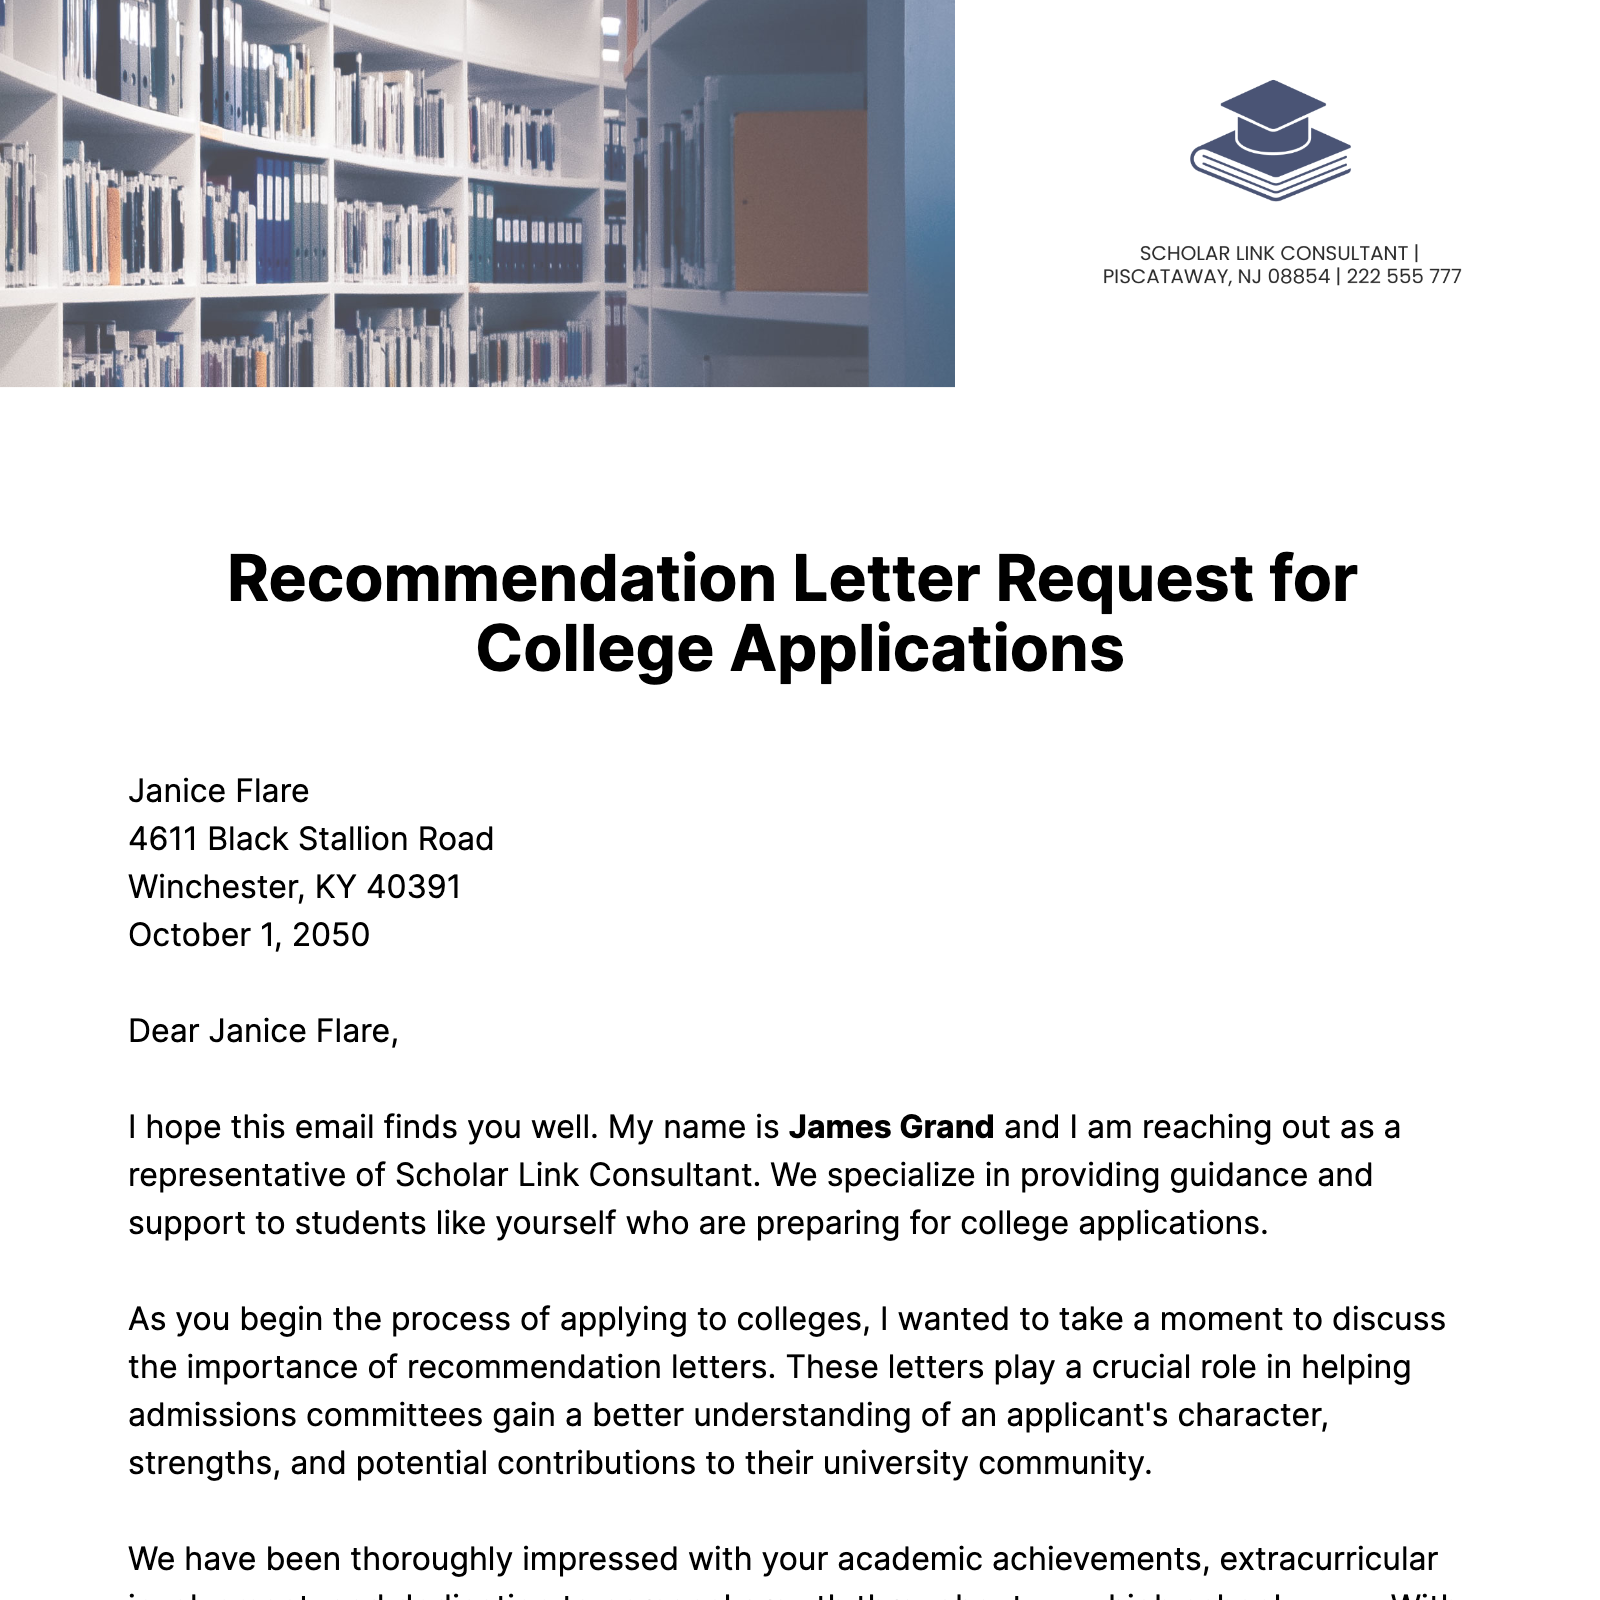 Recommendation Letter Request for College Applications  Template